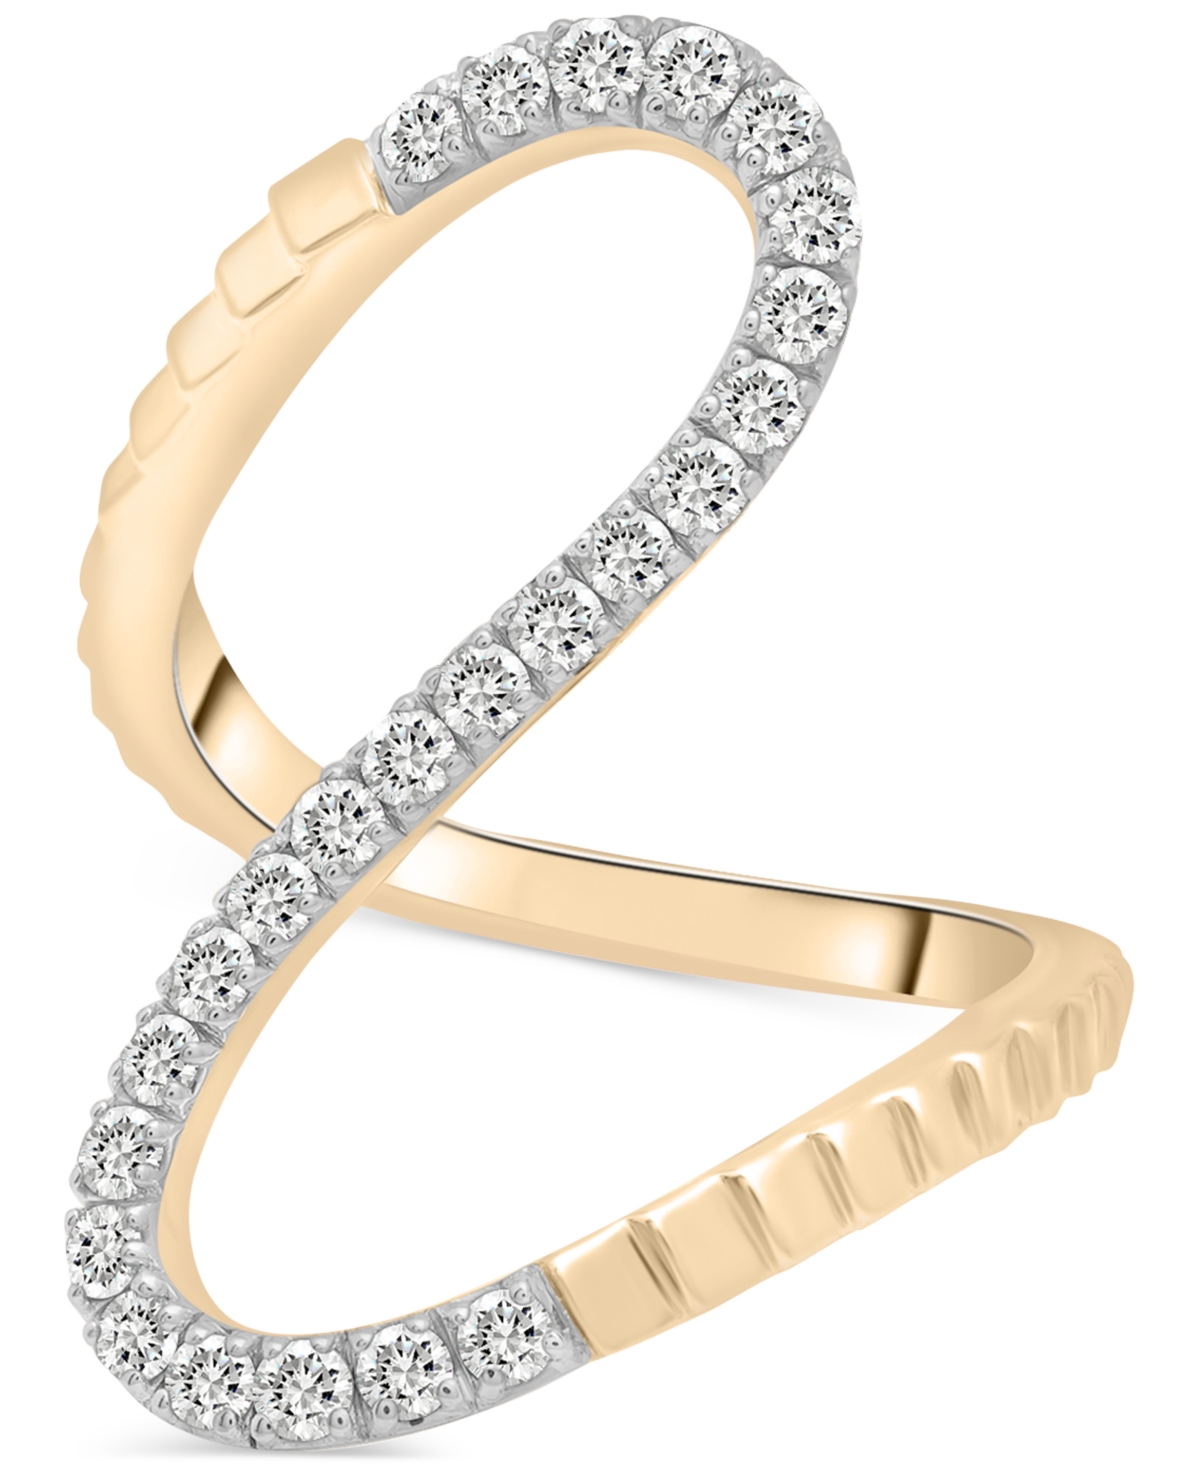 Diamond Infinity Statement Ring (1/2 ct. t.w.) in Gold Vermeil, Created for Macy's - Gold Vermeil